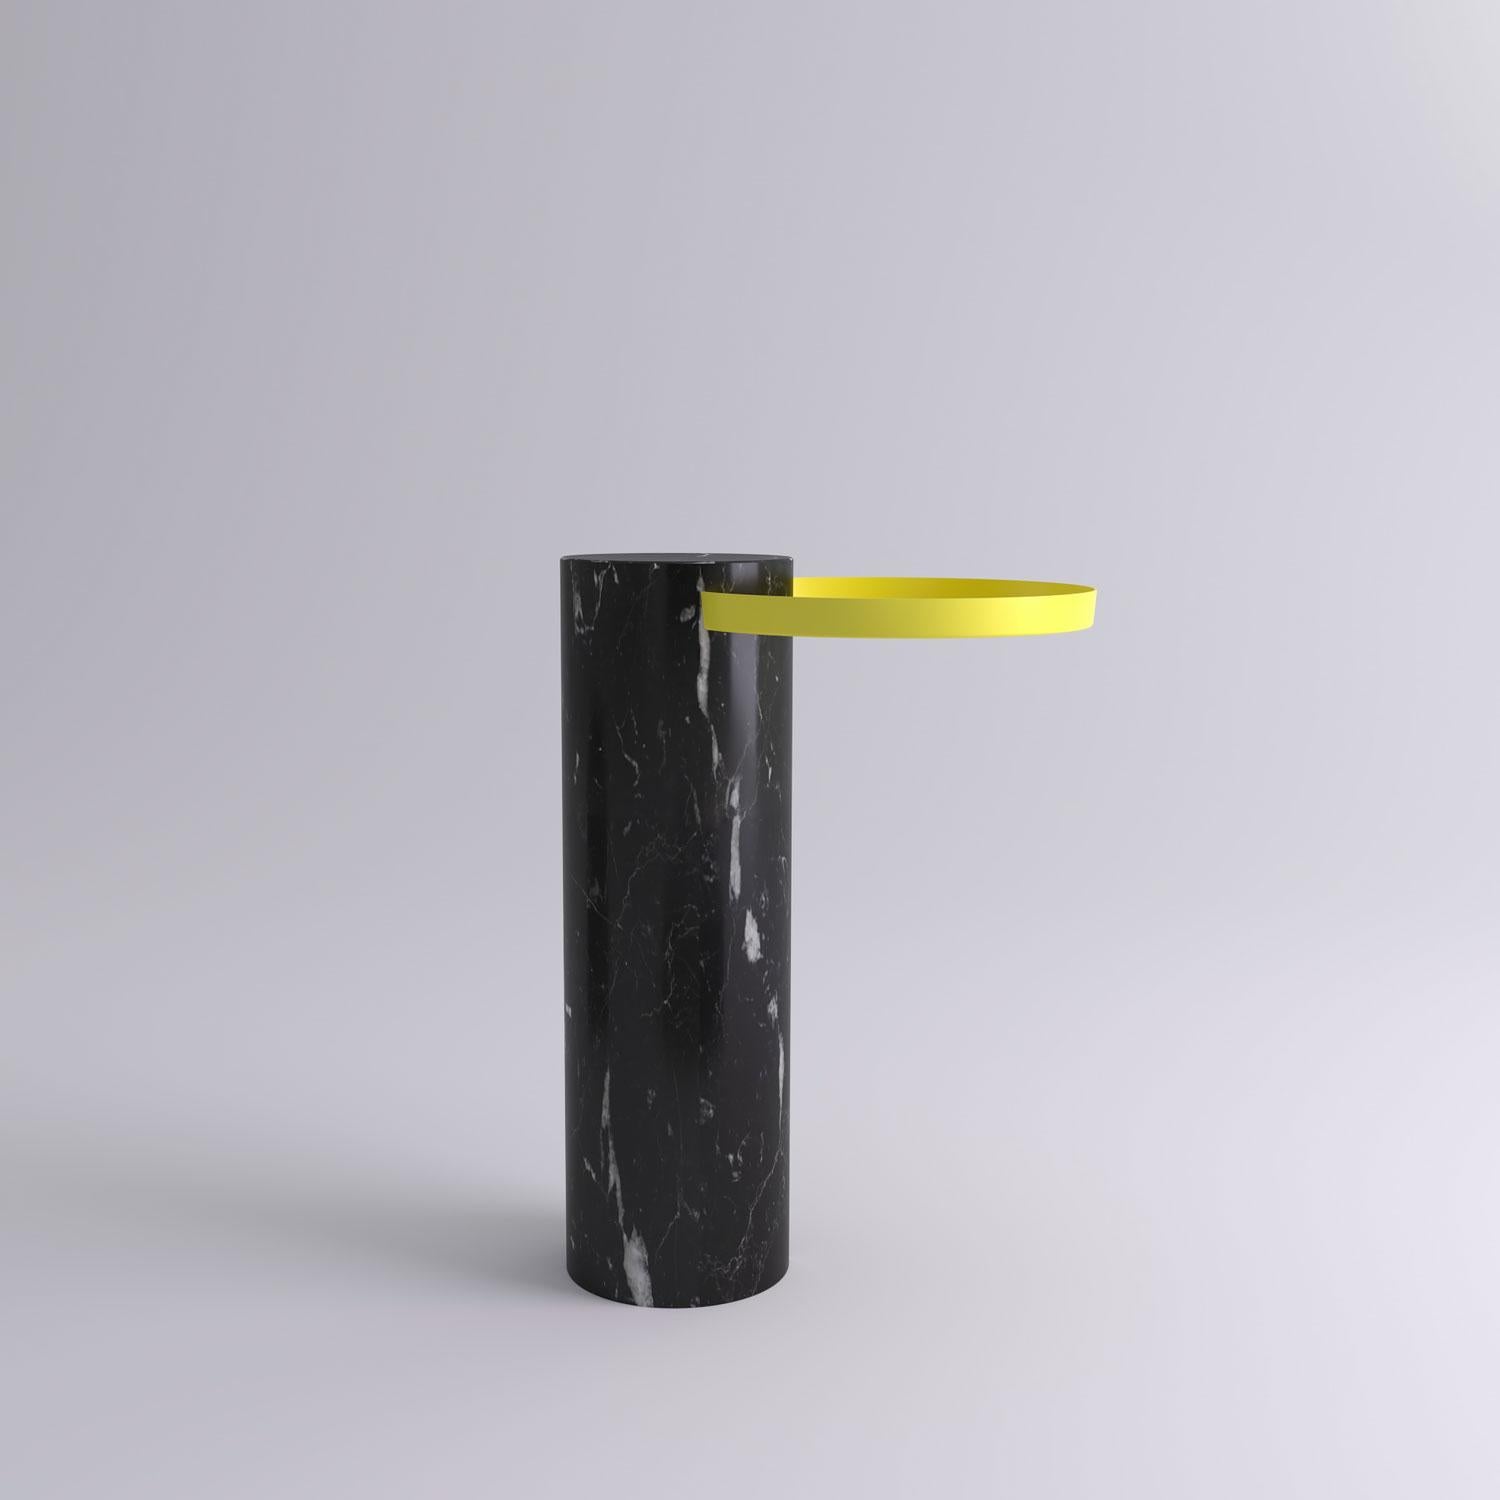 High black marquina marble contemporary guéridon, Sebastian Herkner
Dimensions: D 42 x H 57 cm
Materials: Black Marquina marble, yellow metal tray

The salute table exists in 3 sizes, 4 different marble stones for the column and 5 different